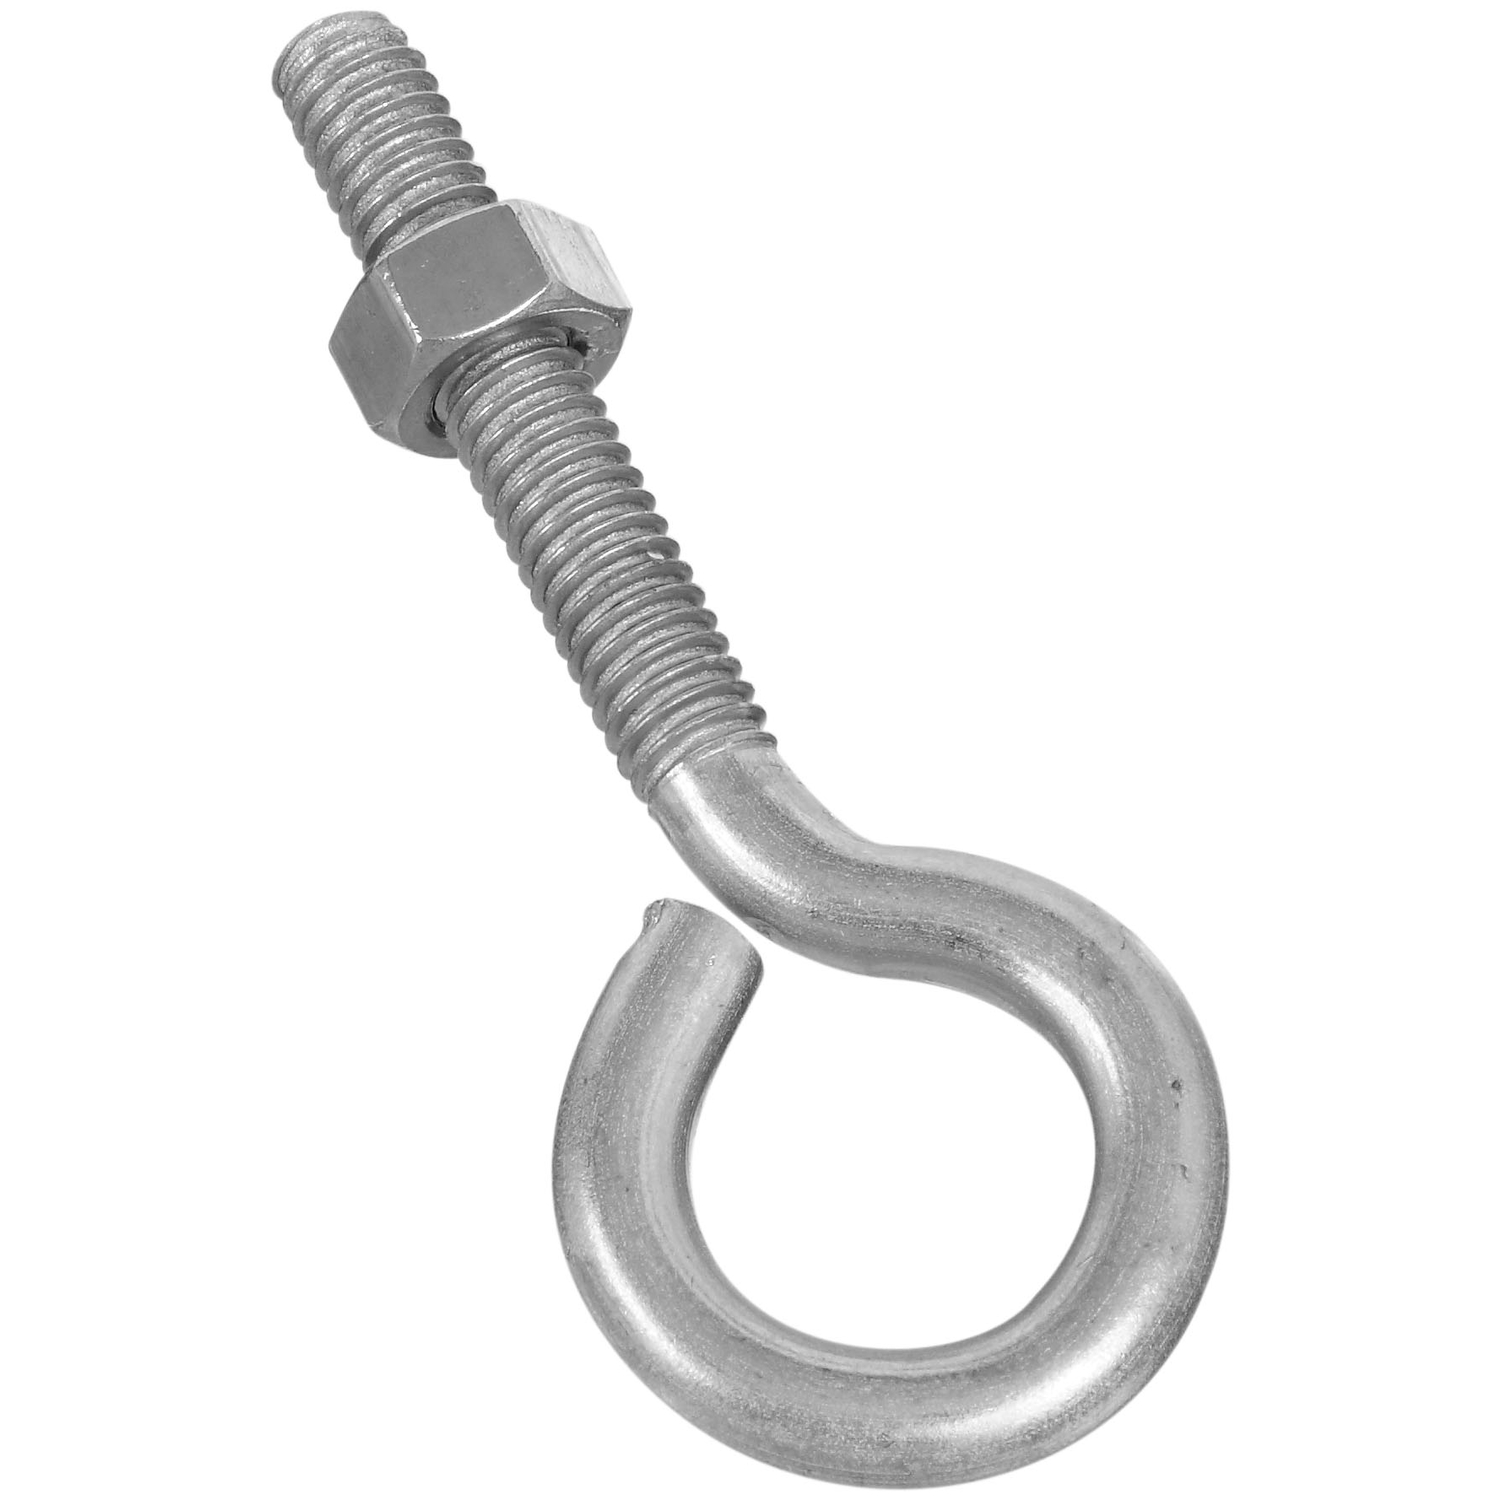 Photos - Nail / Screw / Fastener National Hardware 5/16 in. X 3-1/4 in. L Stainless Steel Eyebolt Nut Inclu 